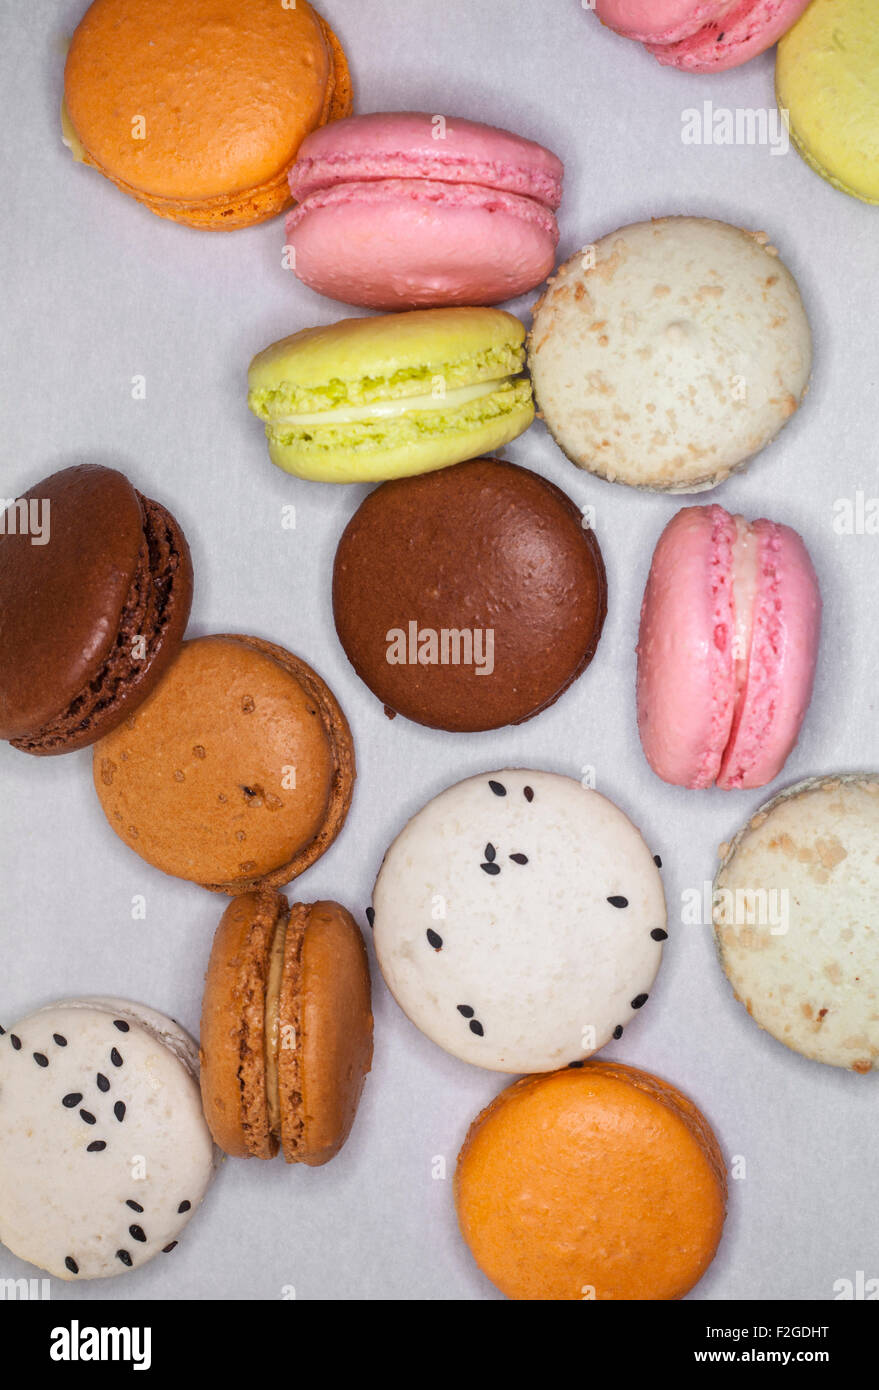 various macaroons flavors and colors of macaroons, on a white background Stock Photo